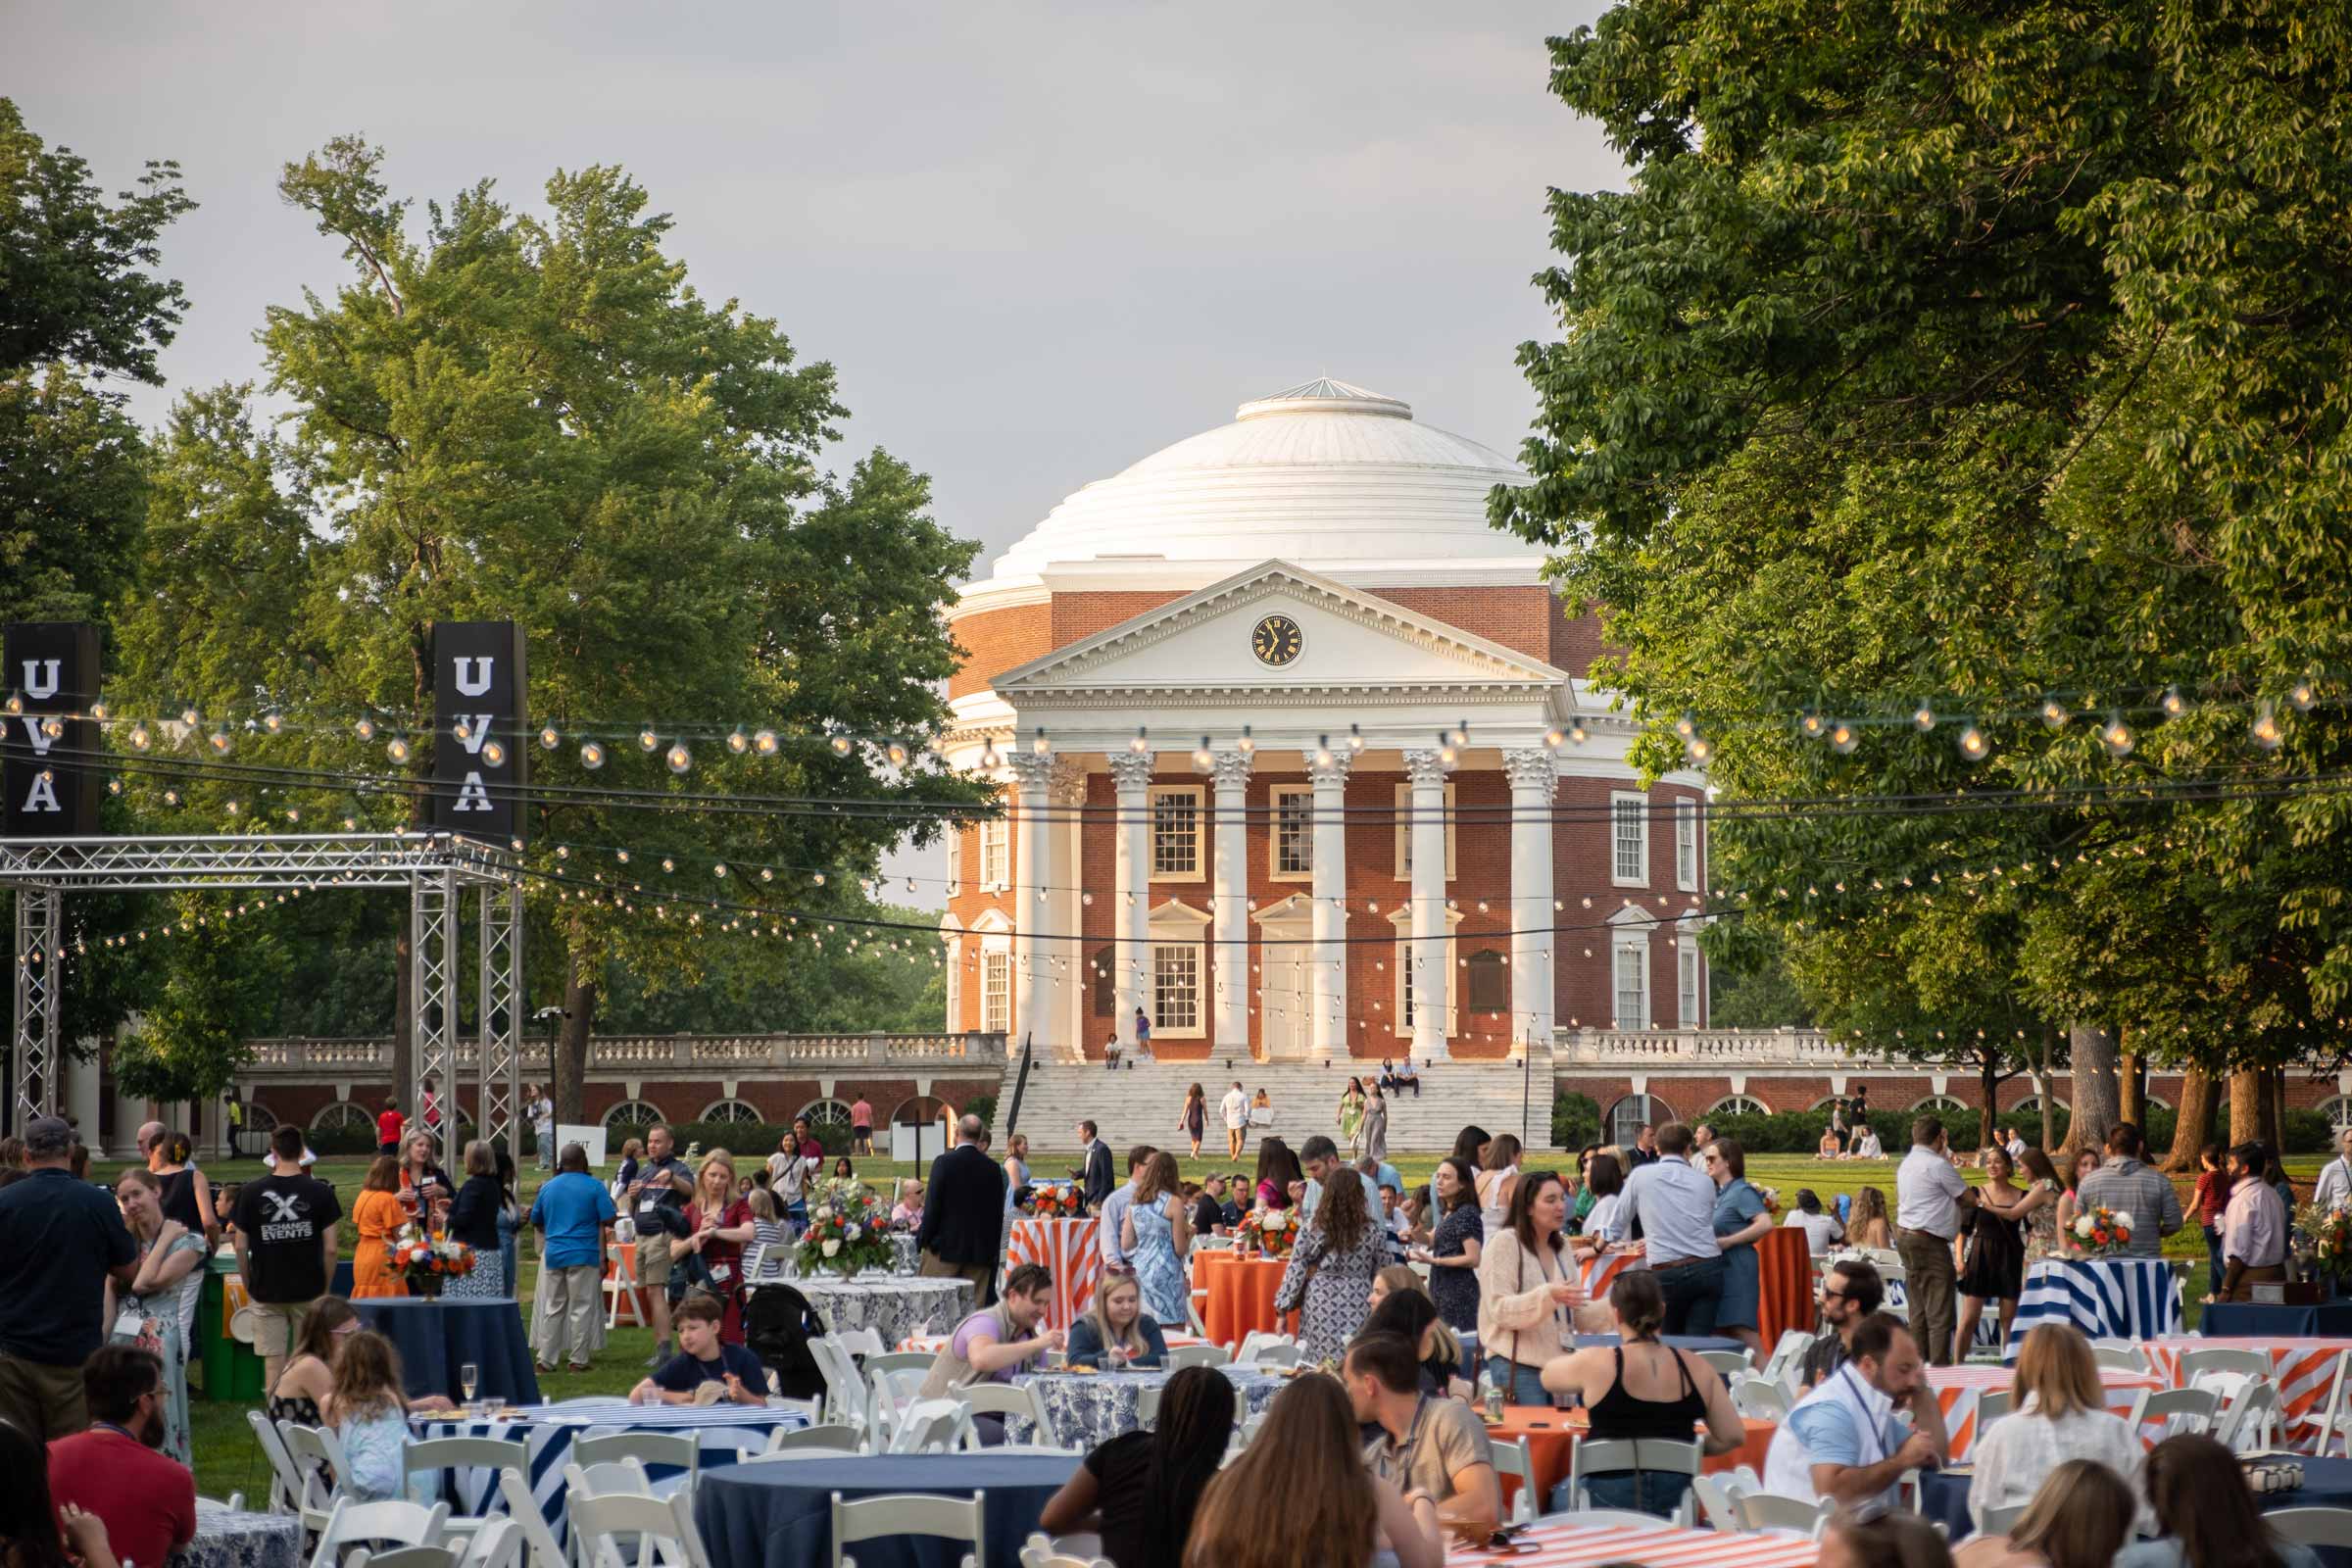 A reunion gathering on the lawn with the Rotunda in the background and nice bulb lights surrounding the picnic tables that alumni sit at